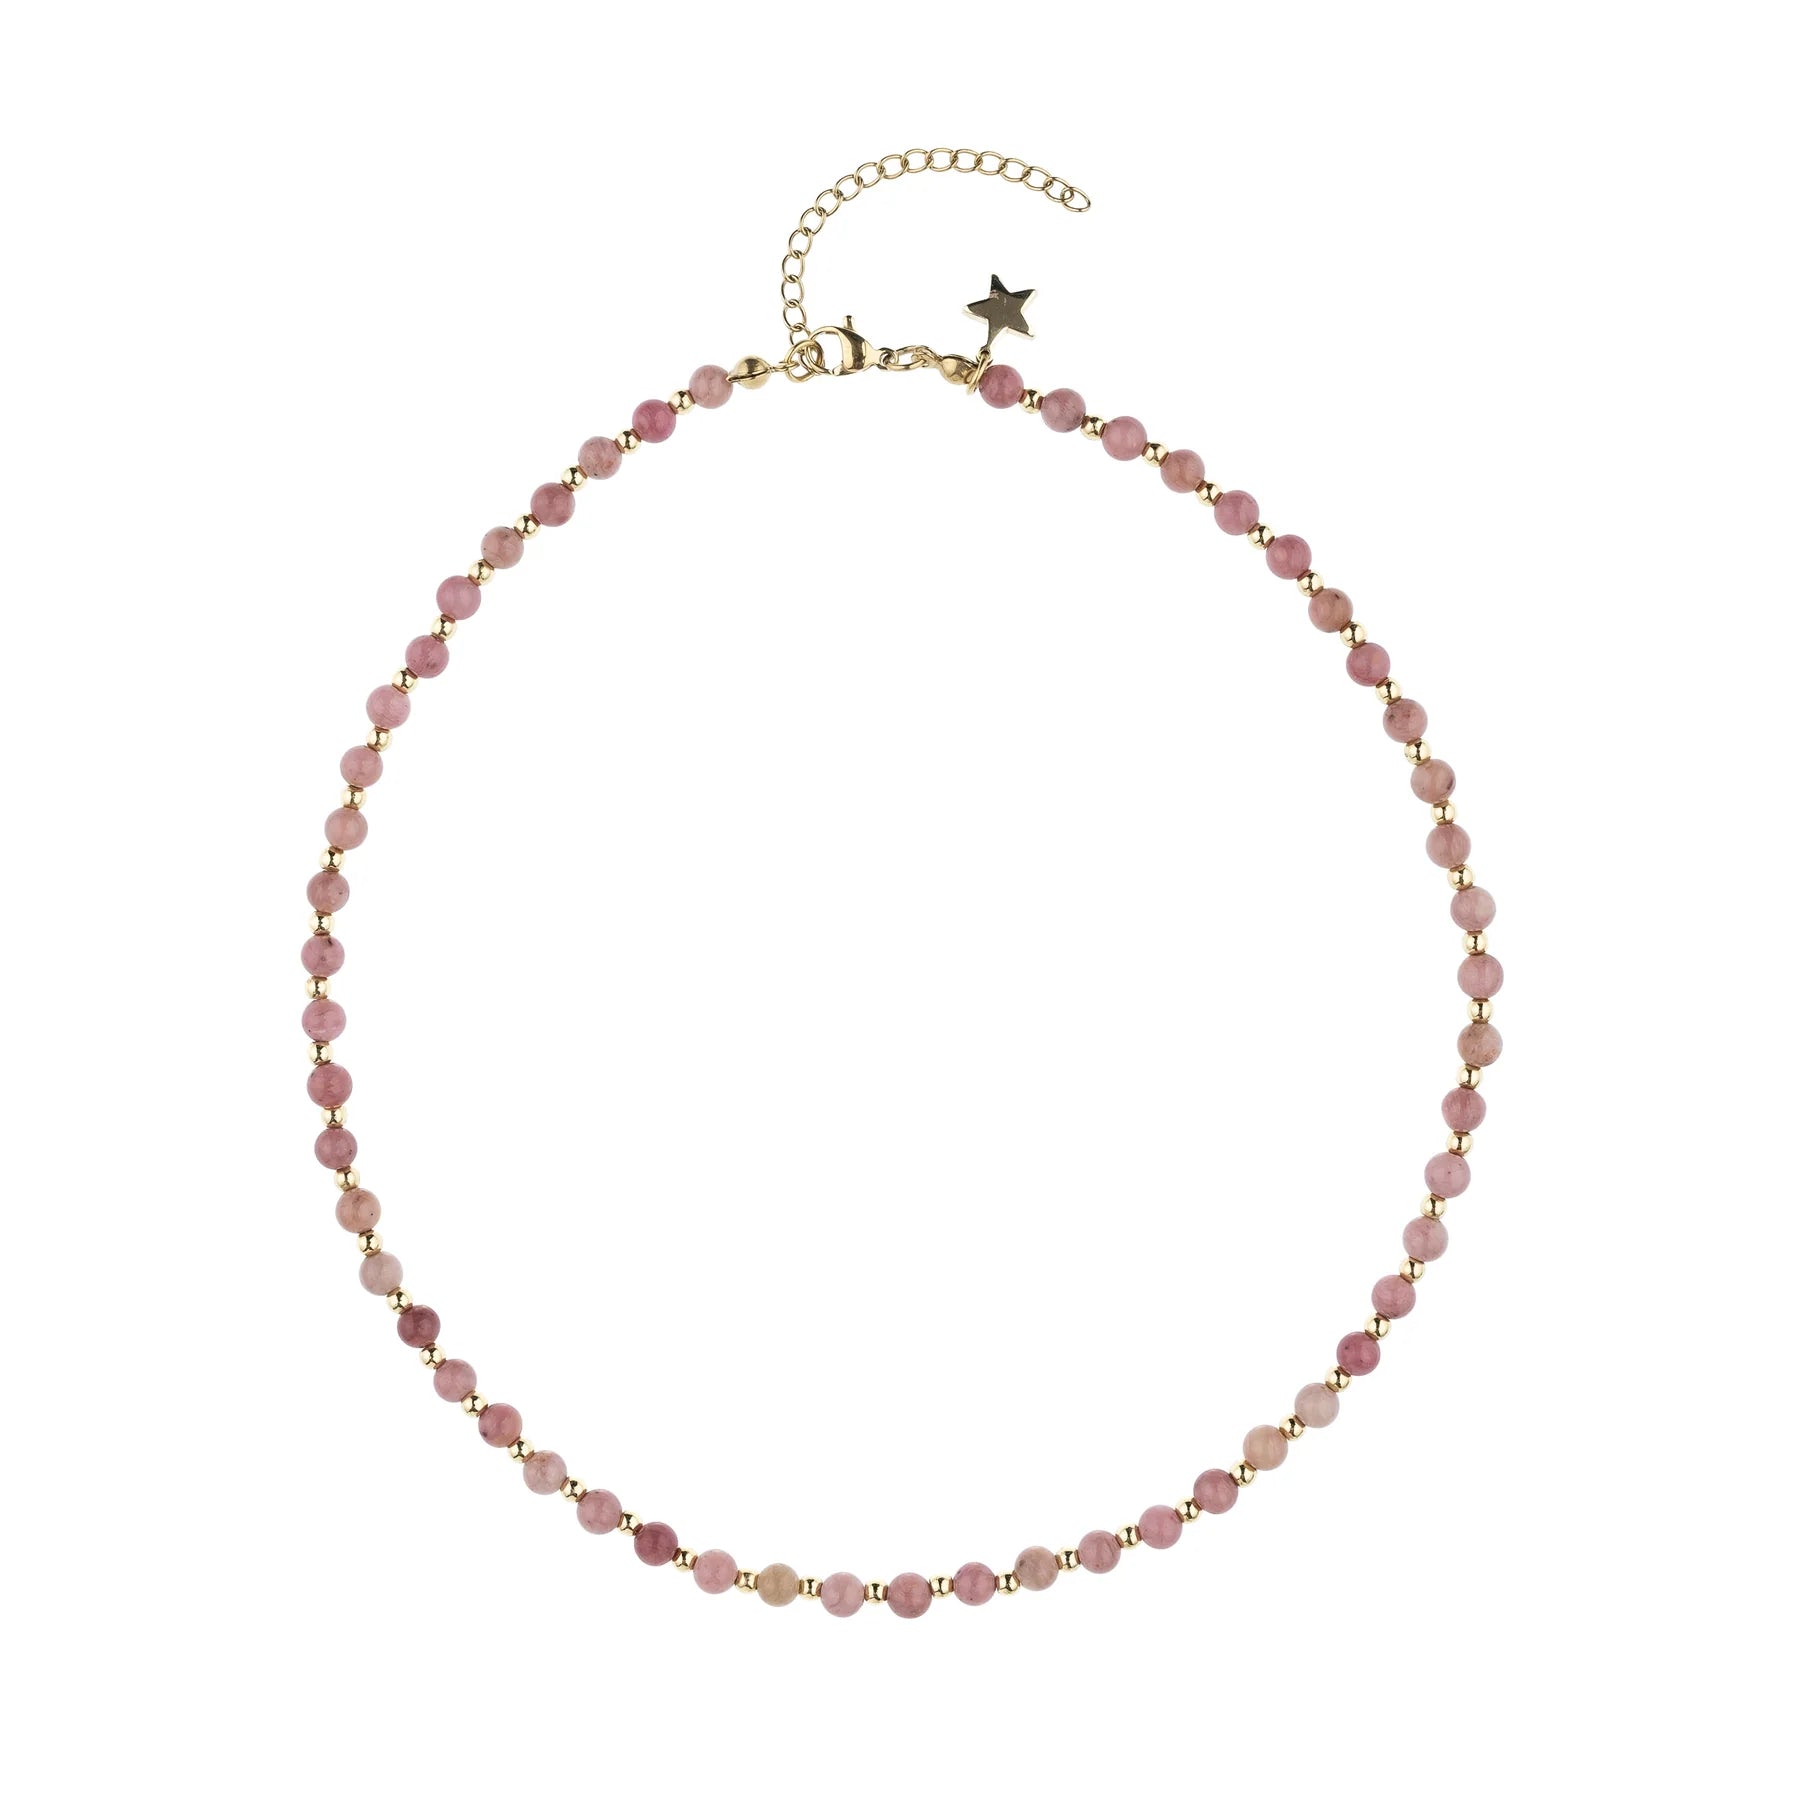 Stone Bead Necklace 3mm Dusty Rose